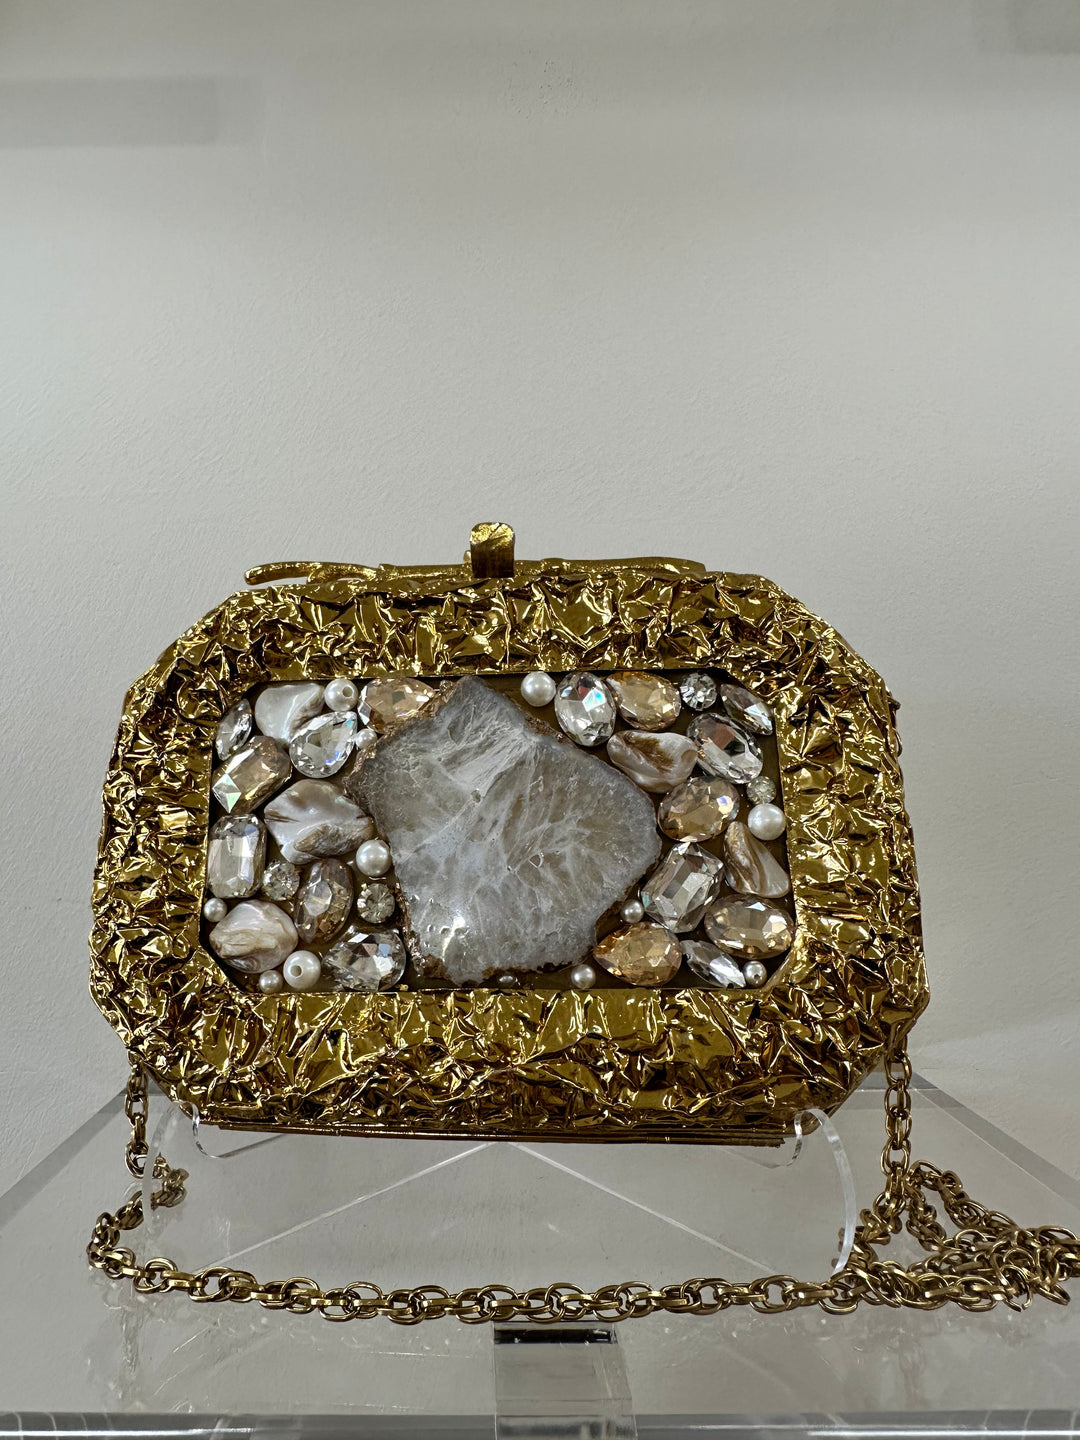 Gilded Clutch